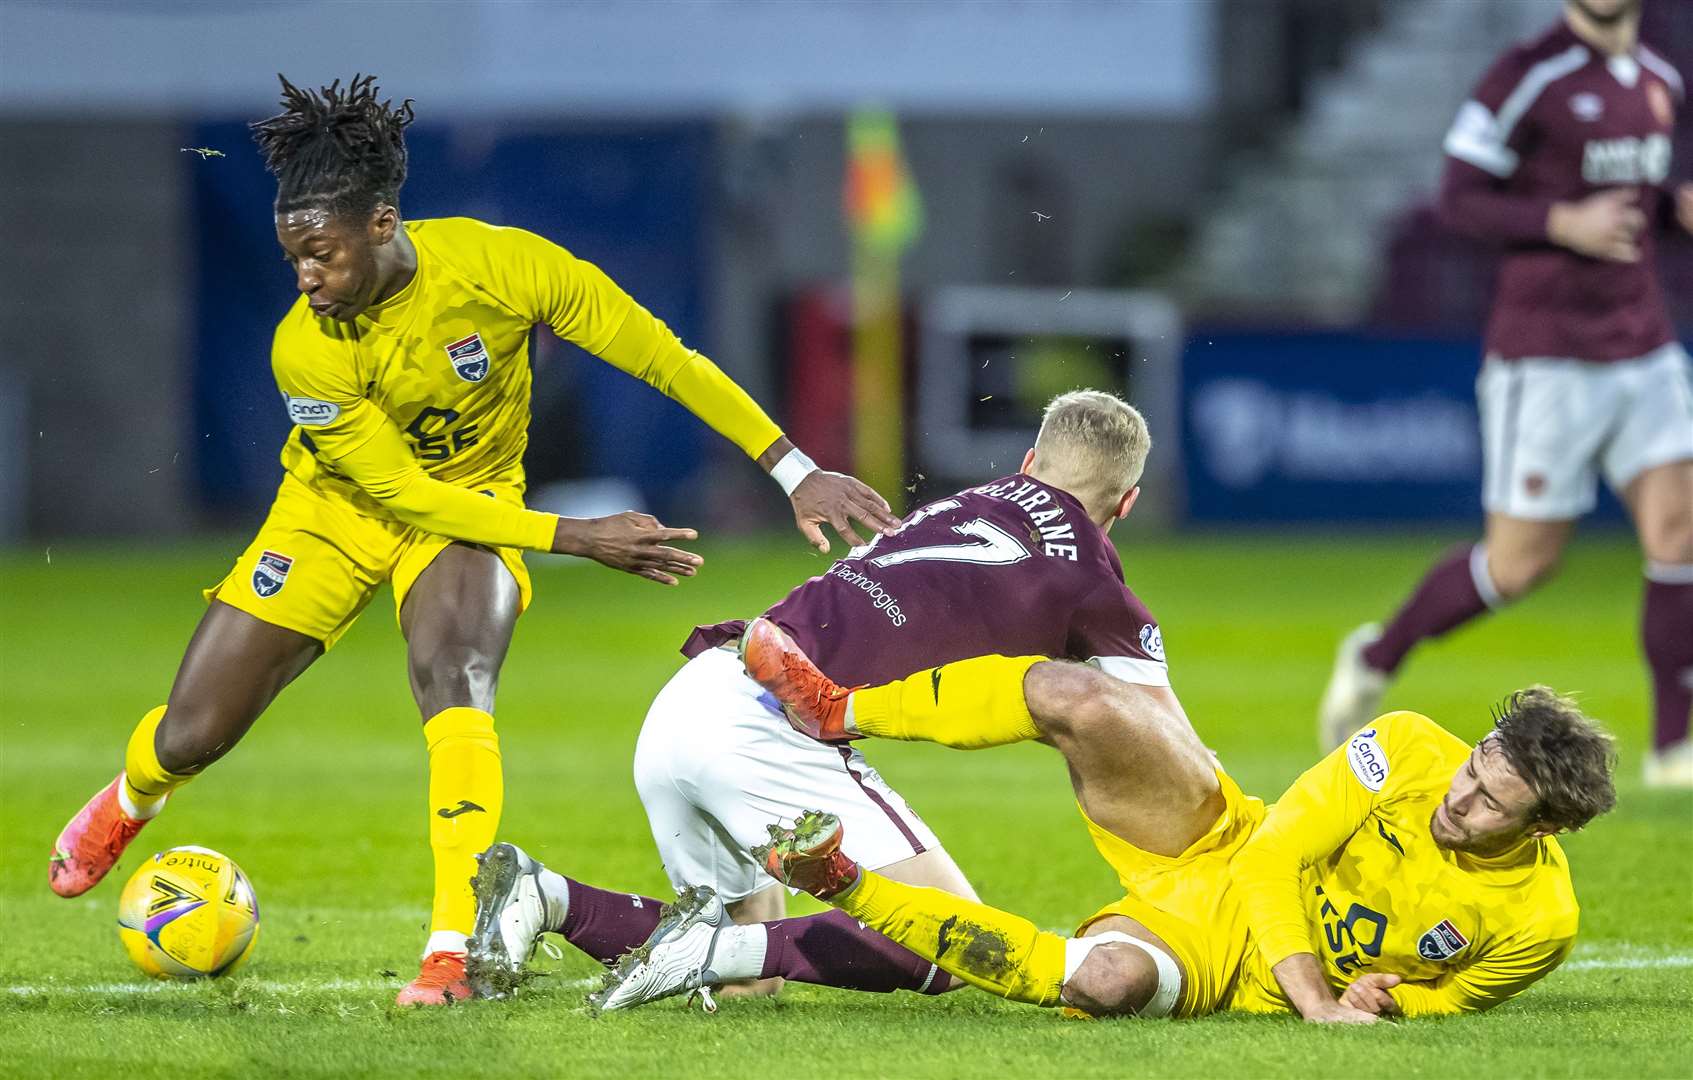 26-12-2021 Sport - football - SPFL Premiership tie. Hearts V Ross County Ross County's Joseph Hungbo gets away from Hearts' Alex Cochrane. Pic:Andy Barr www.andybarr.com Copyright Andrew Barr Photography. No reuse without permission. andybarr@mac.com +44 797492391901-05-2021